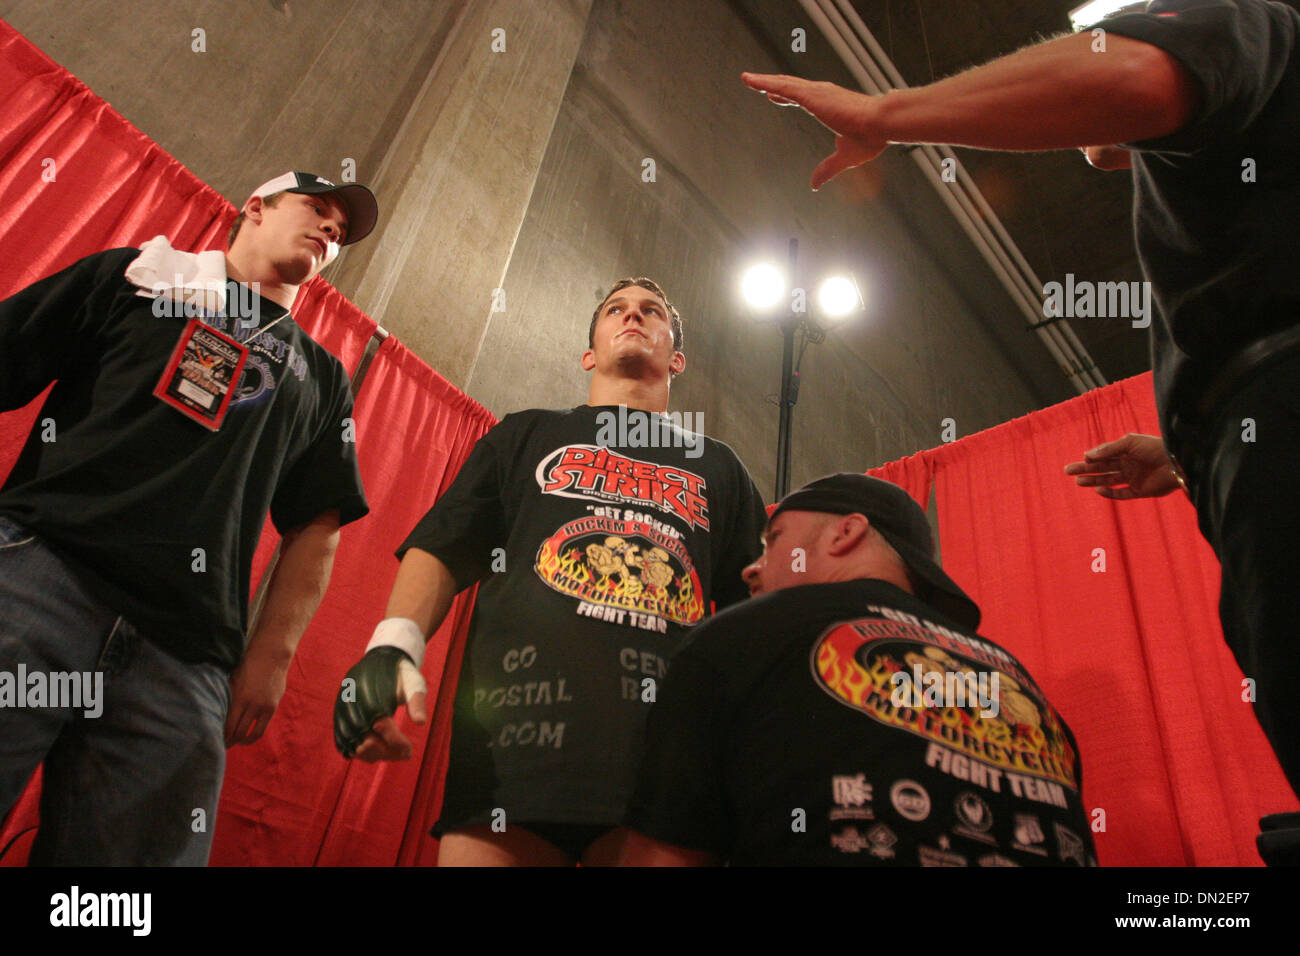 Aug 09, 2006; Las Vegas, NV, USA; DREW FICKETT eyes up his opponent, while being greased-up and receiving last minute advise form his corner team. He went on to win the night's opening fight at the Ultimate Fighting Championships in Las Vegas. Originally banned on TV and in most states in 1997 for it's no holds barred violence, the mixed martial arts style of fighting was resurrect Stock Photo